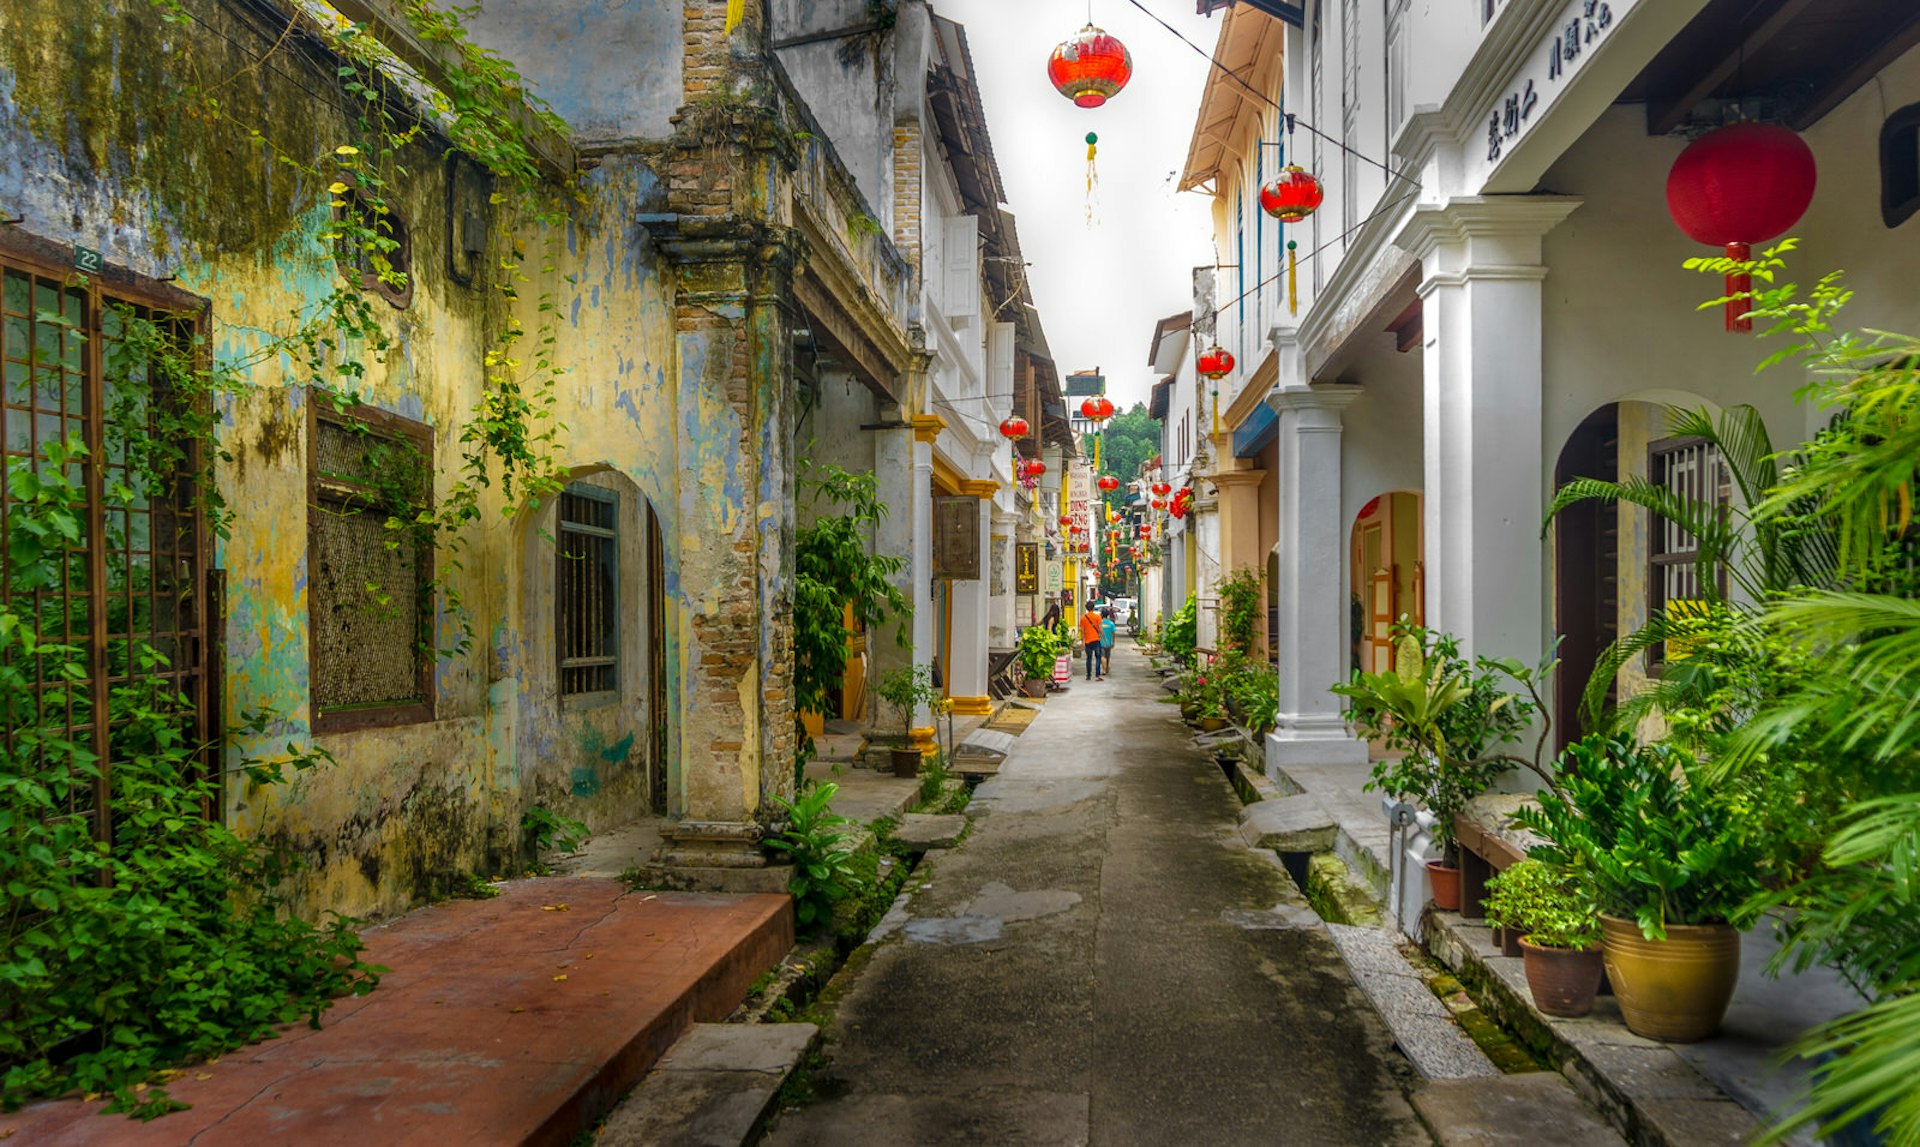 A crumbling colonial backstreet in Ipoh old town